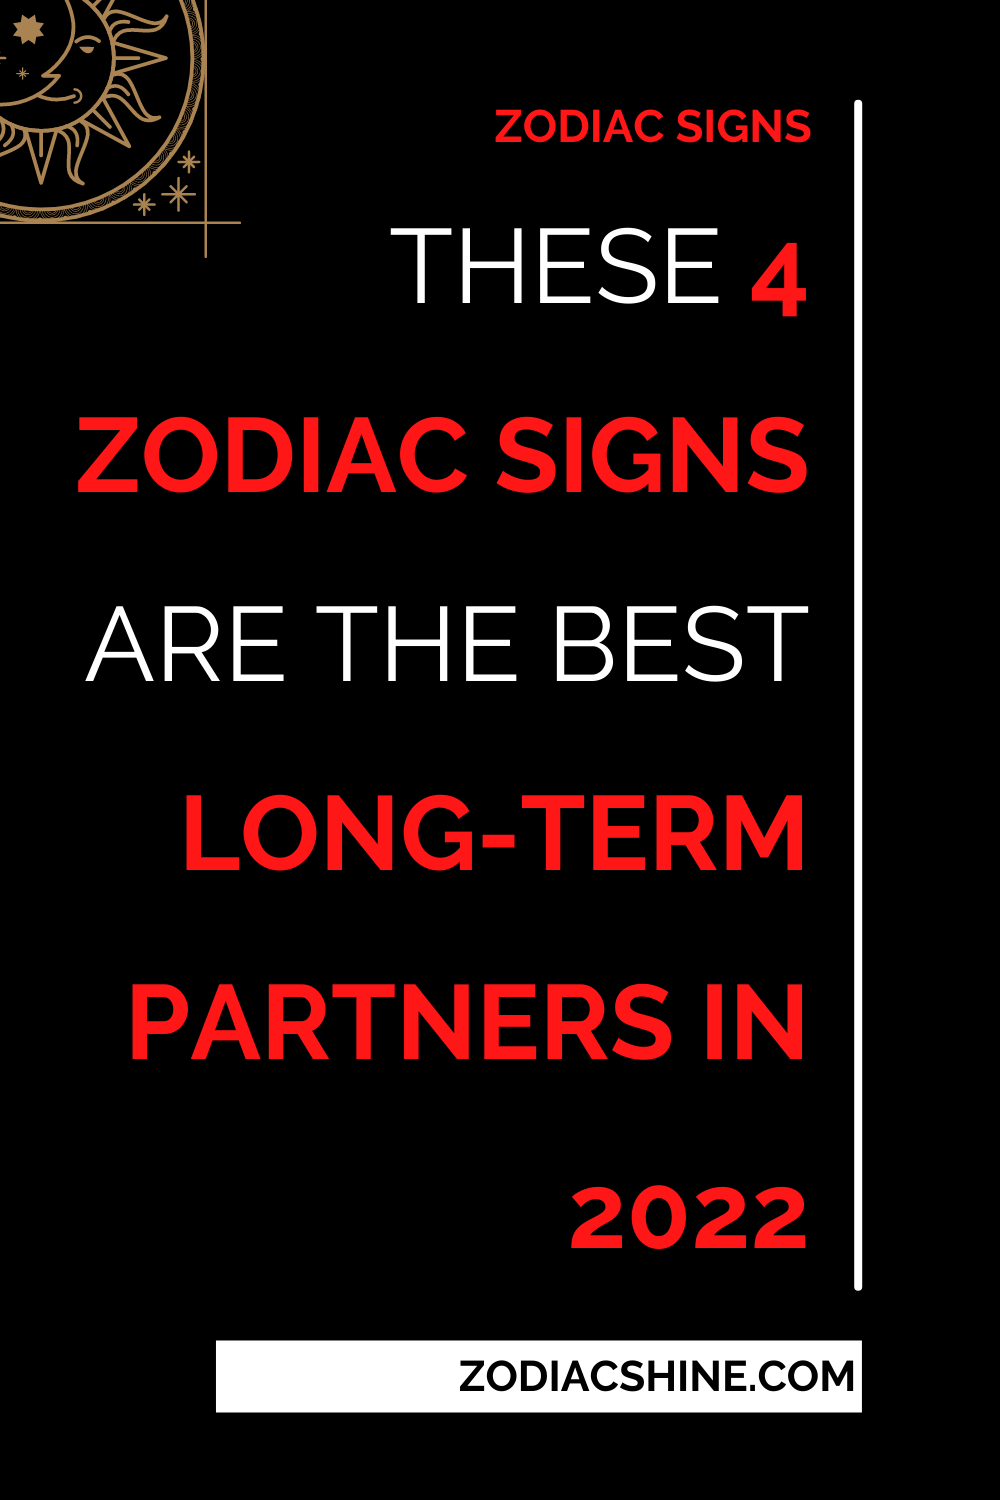 These 4 Zodiac Signs Are The Best Long-term Partners In 2022